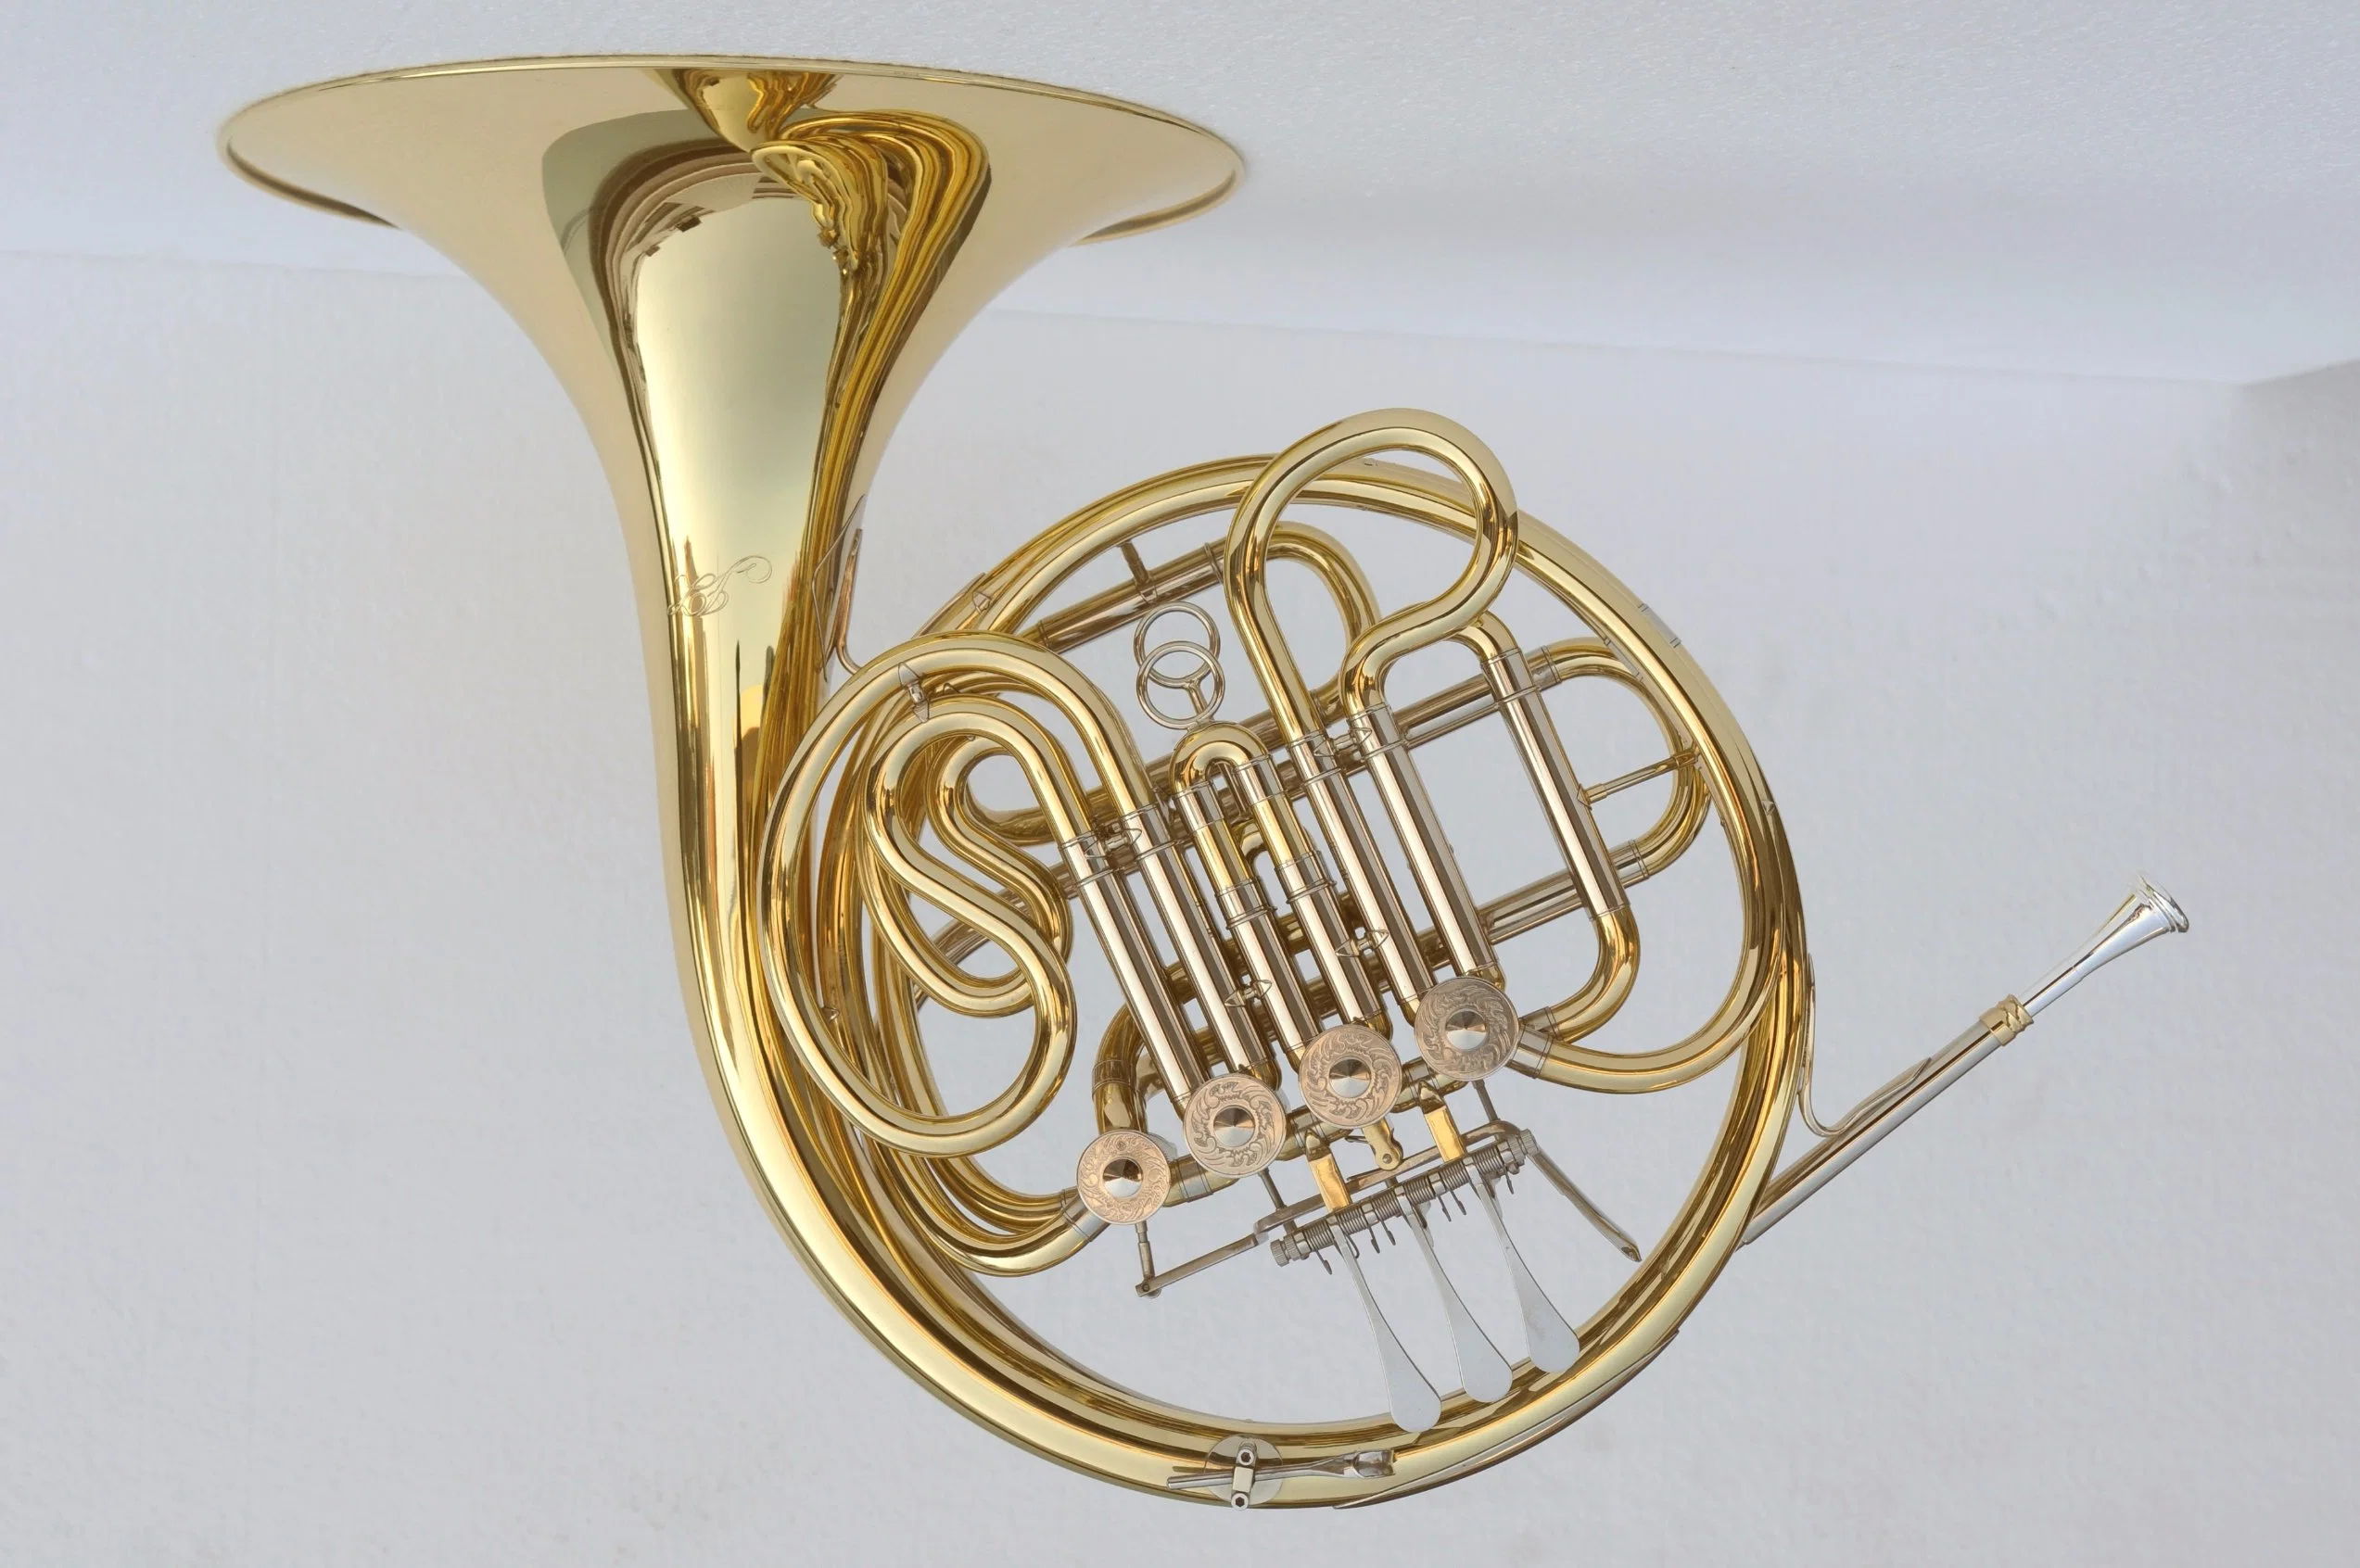 4 Key Double French Horn Gold Brass